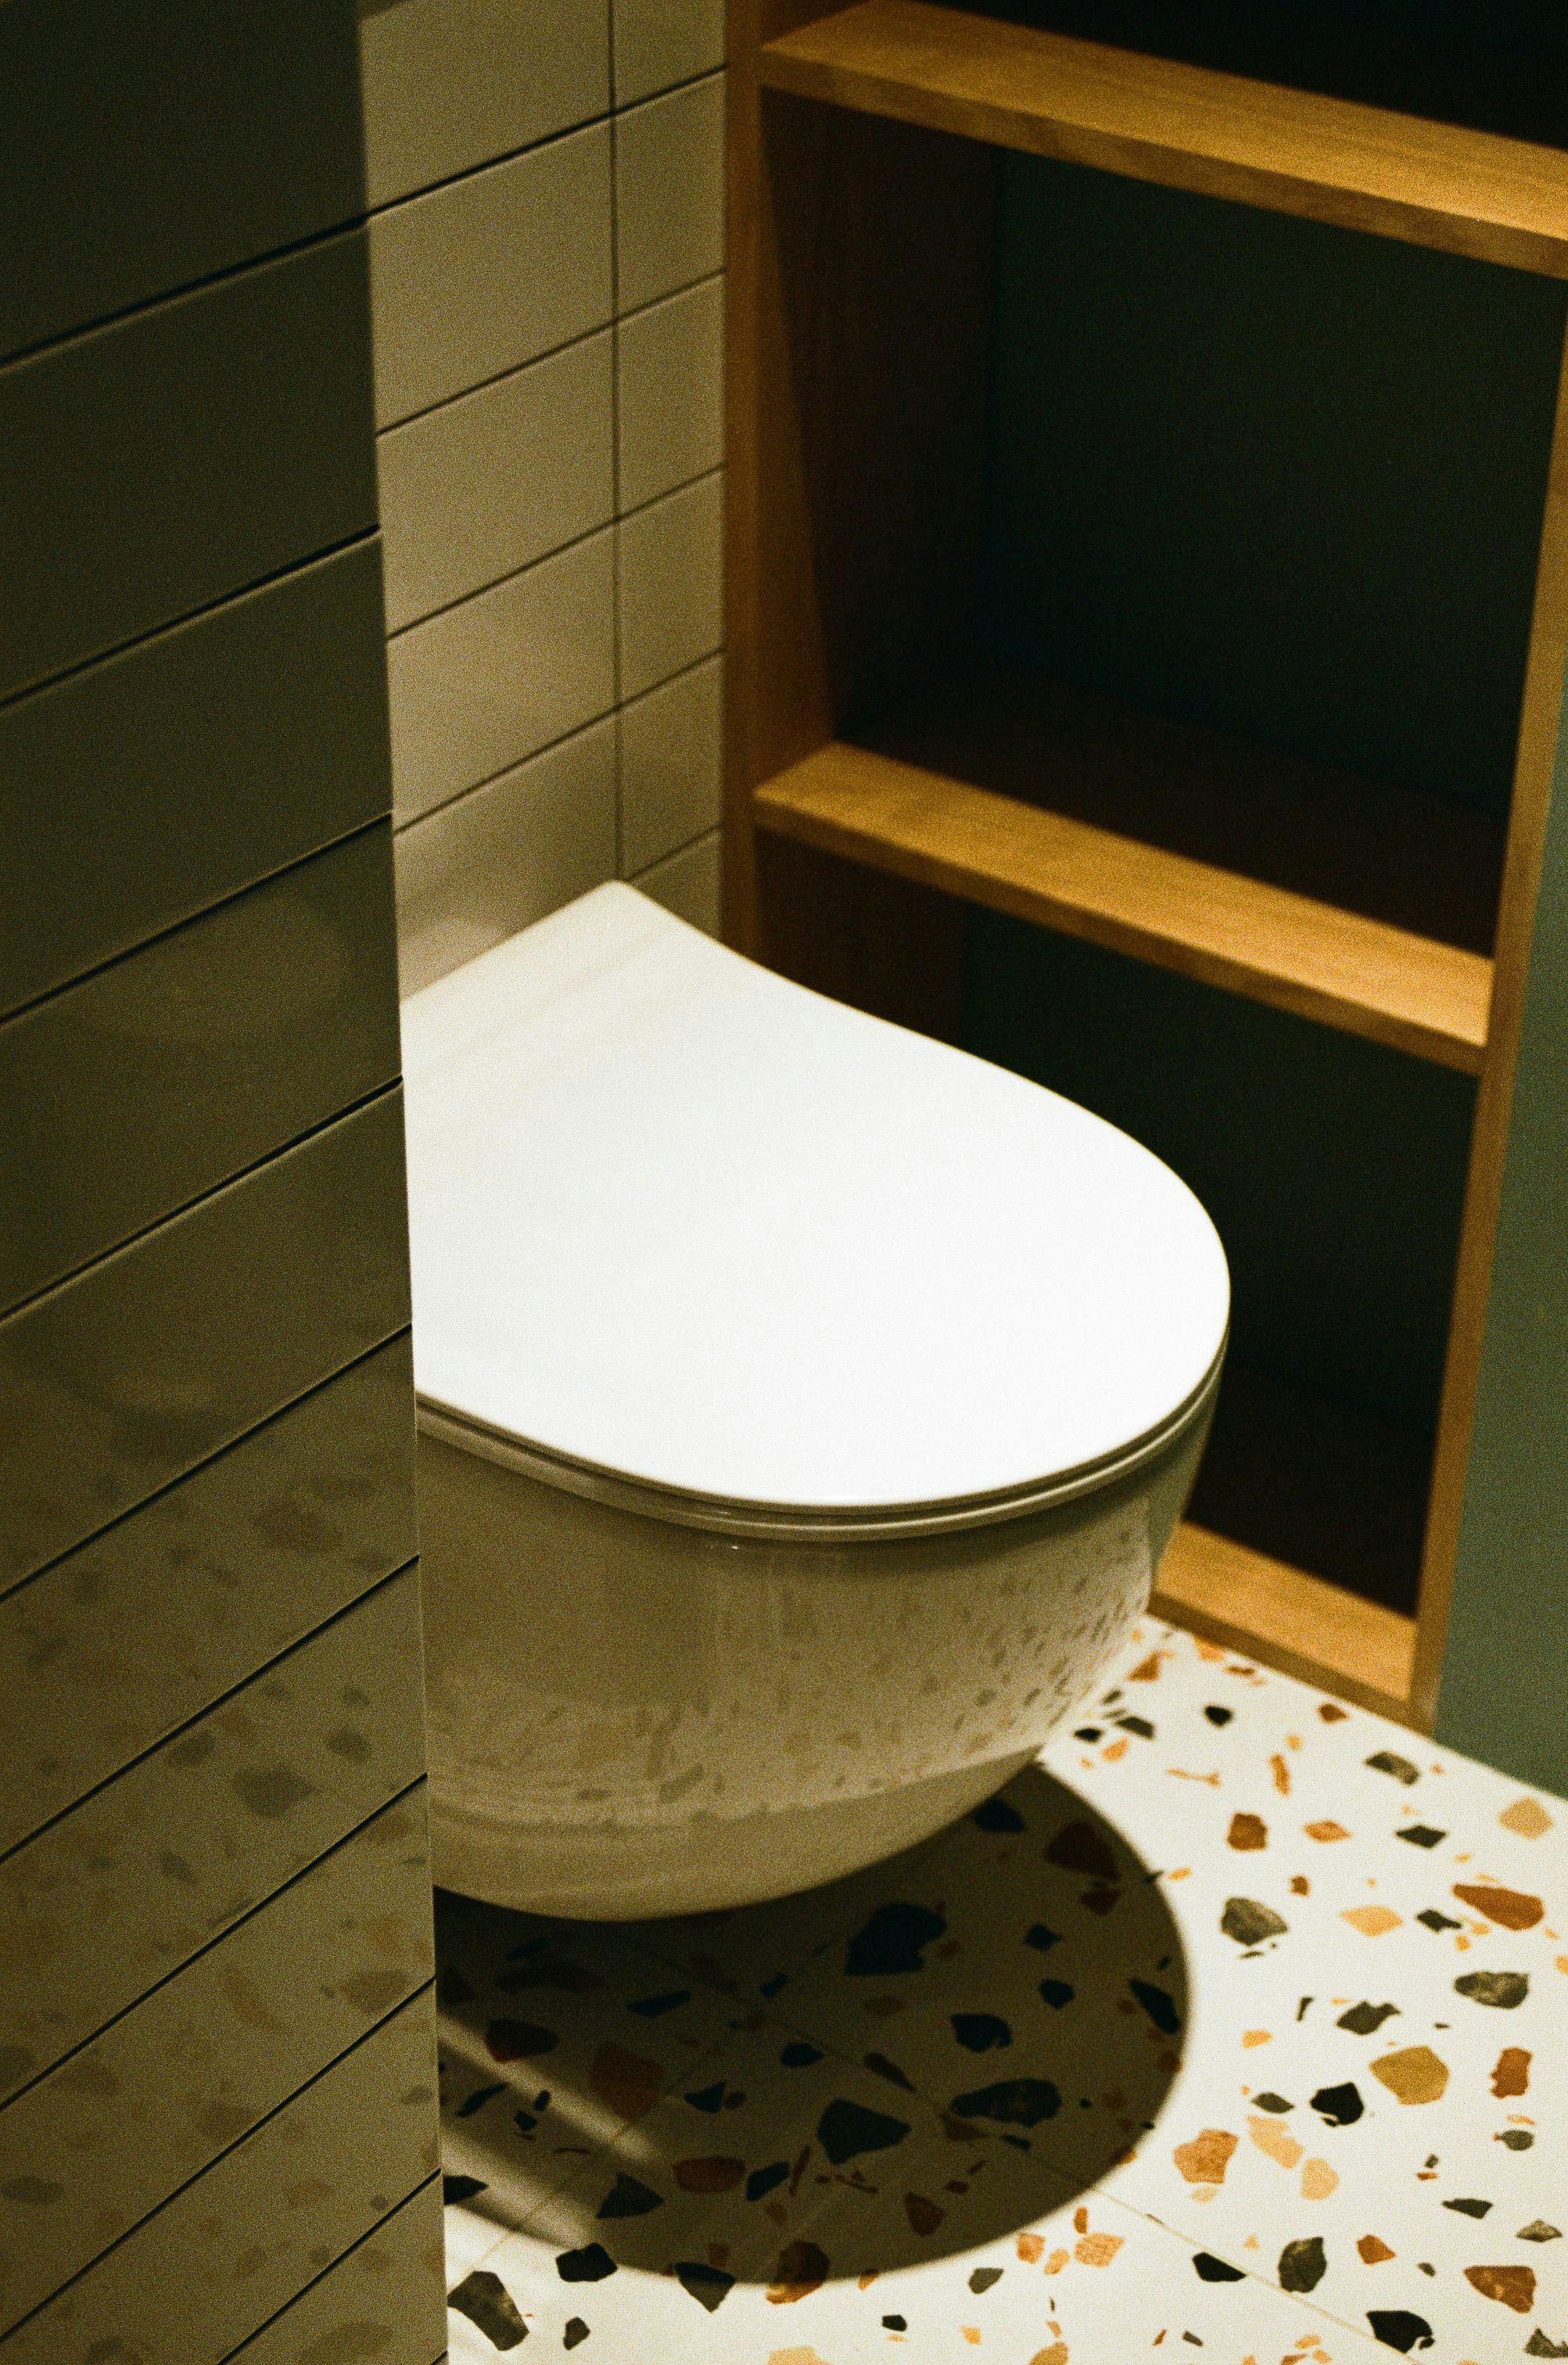 A modern self-cleaning toilet promoting convenience and cleanliness